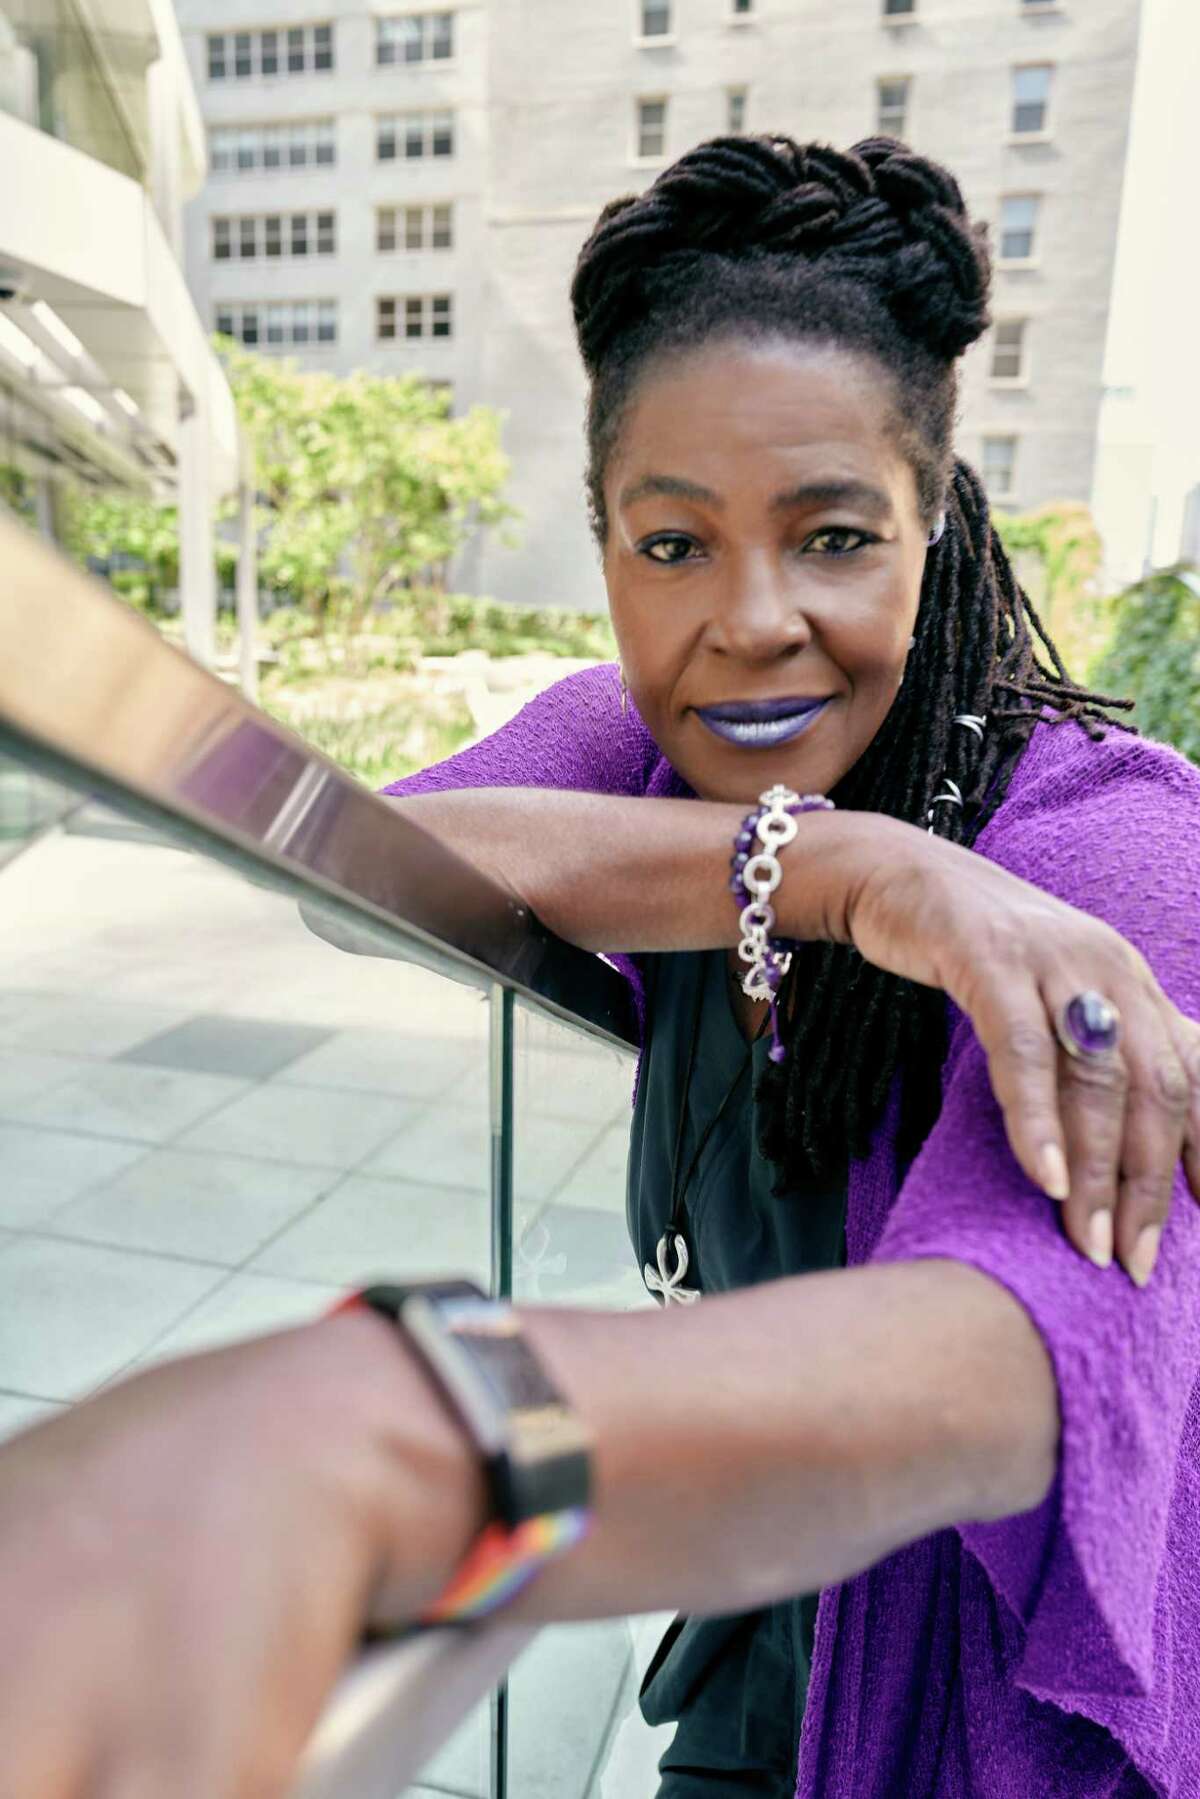 Sharon D Clarke leads "Death of a Salesman" at Broadway's Hudson Theatre. "That is so exciting for me, that there will be a generation that will not only see this and be able to claim it as their own, but it will open their eyes up in a completely different way," she said.